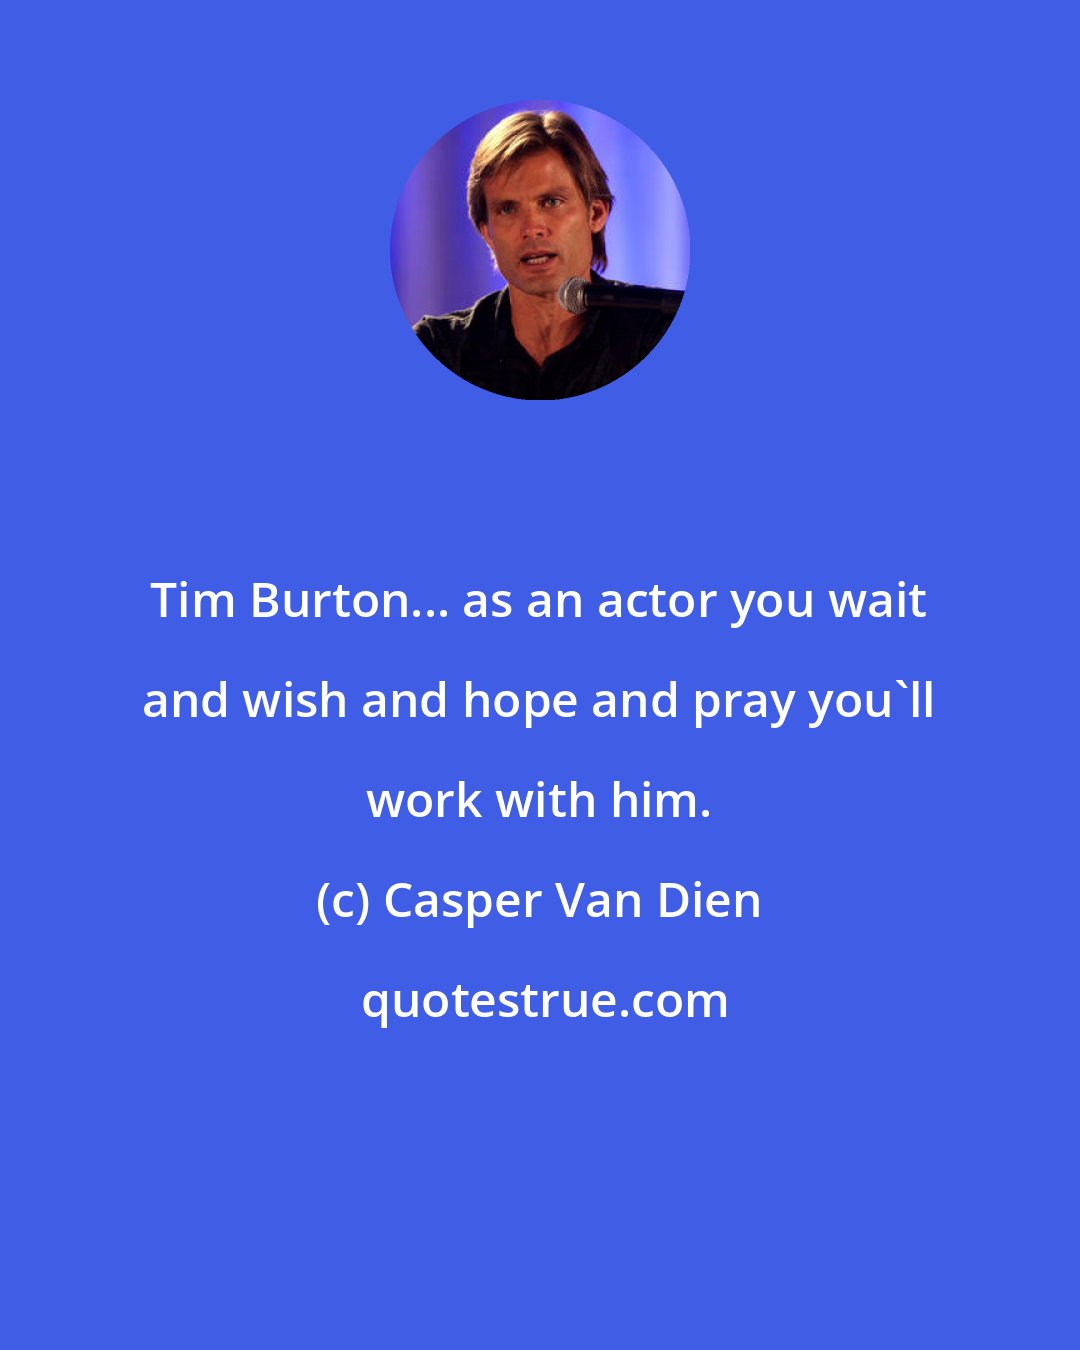 Casper Van Dien: Tim Burton... as an actor you wait and wish and hope and pray you'll work with him.